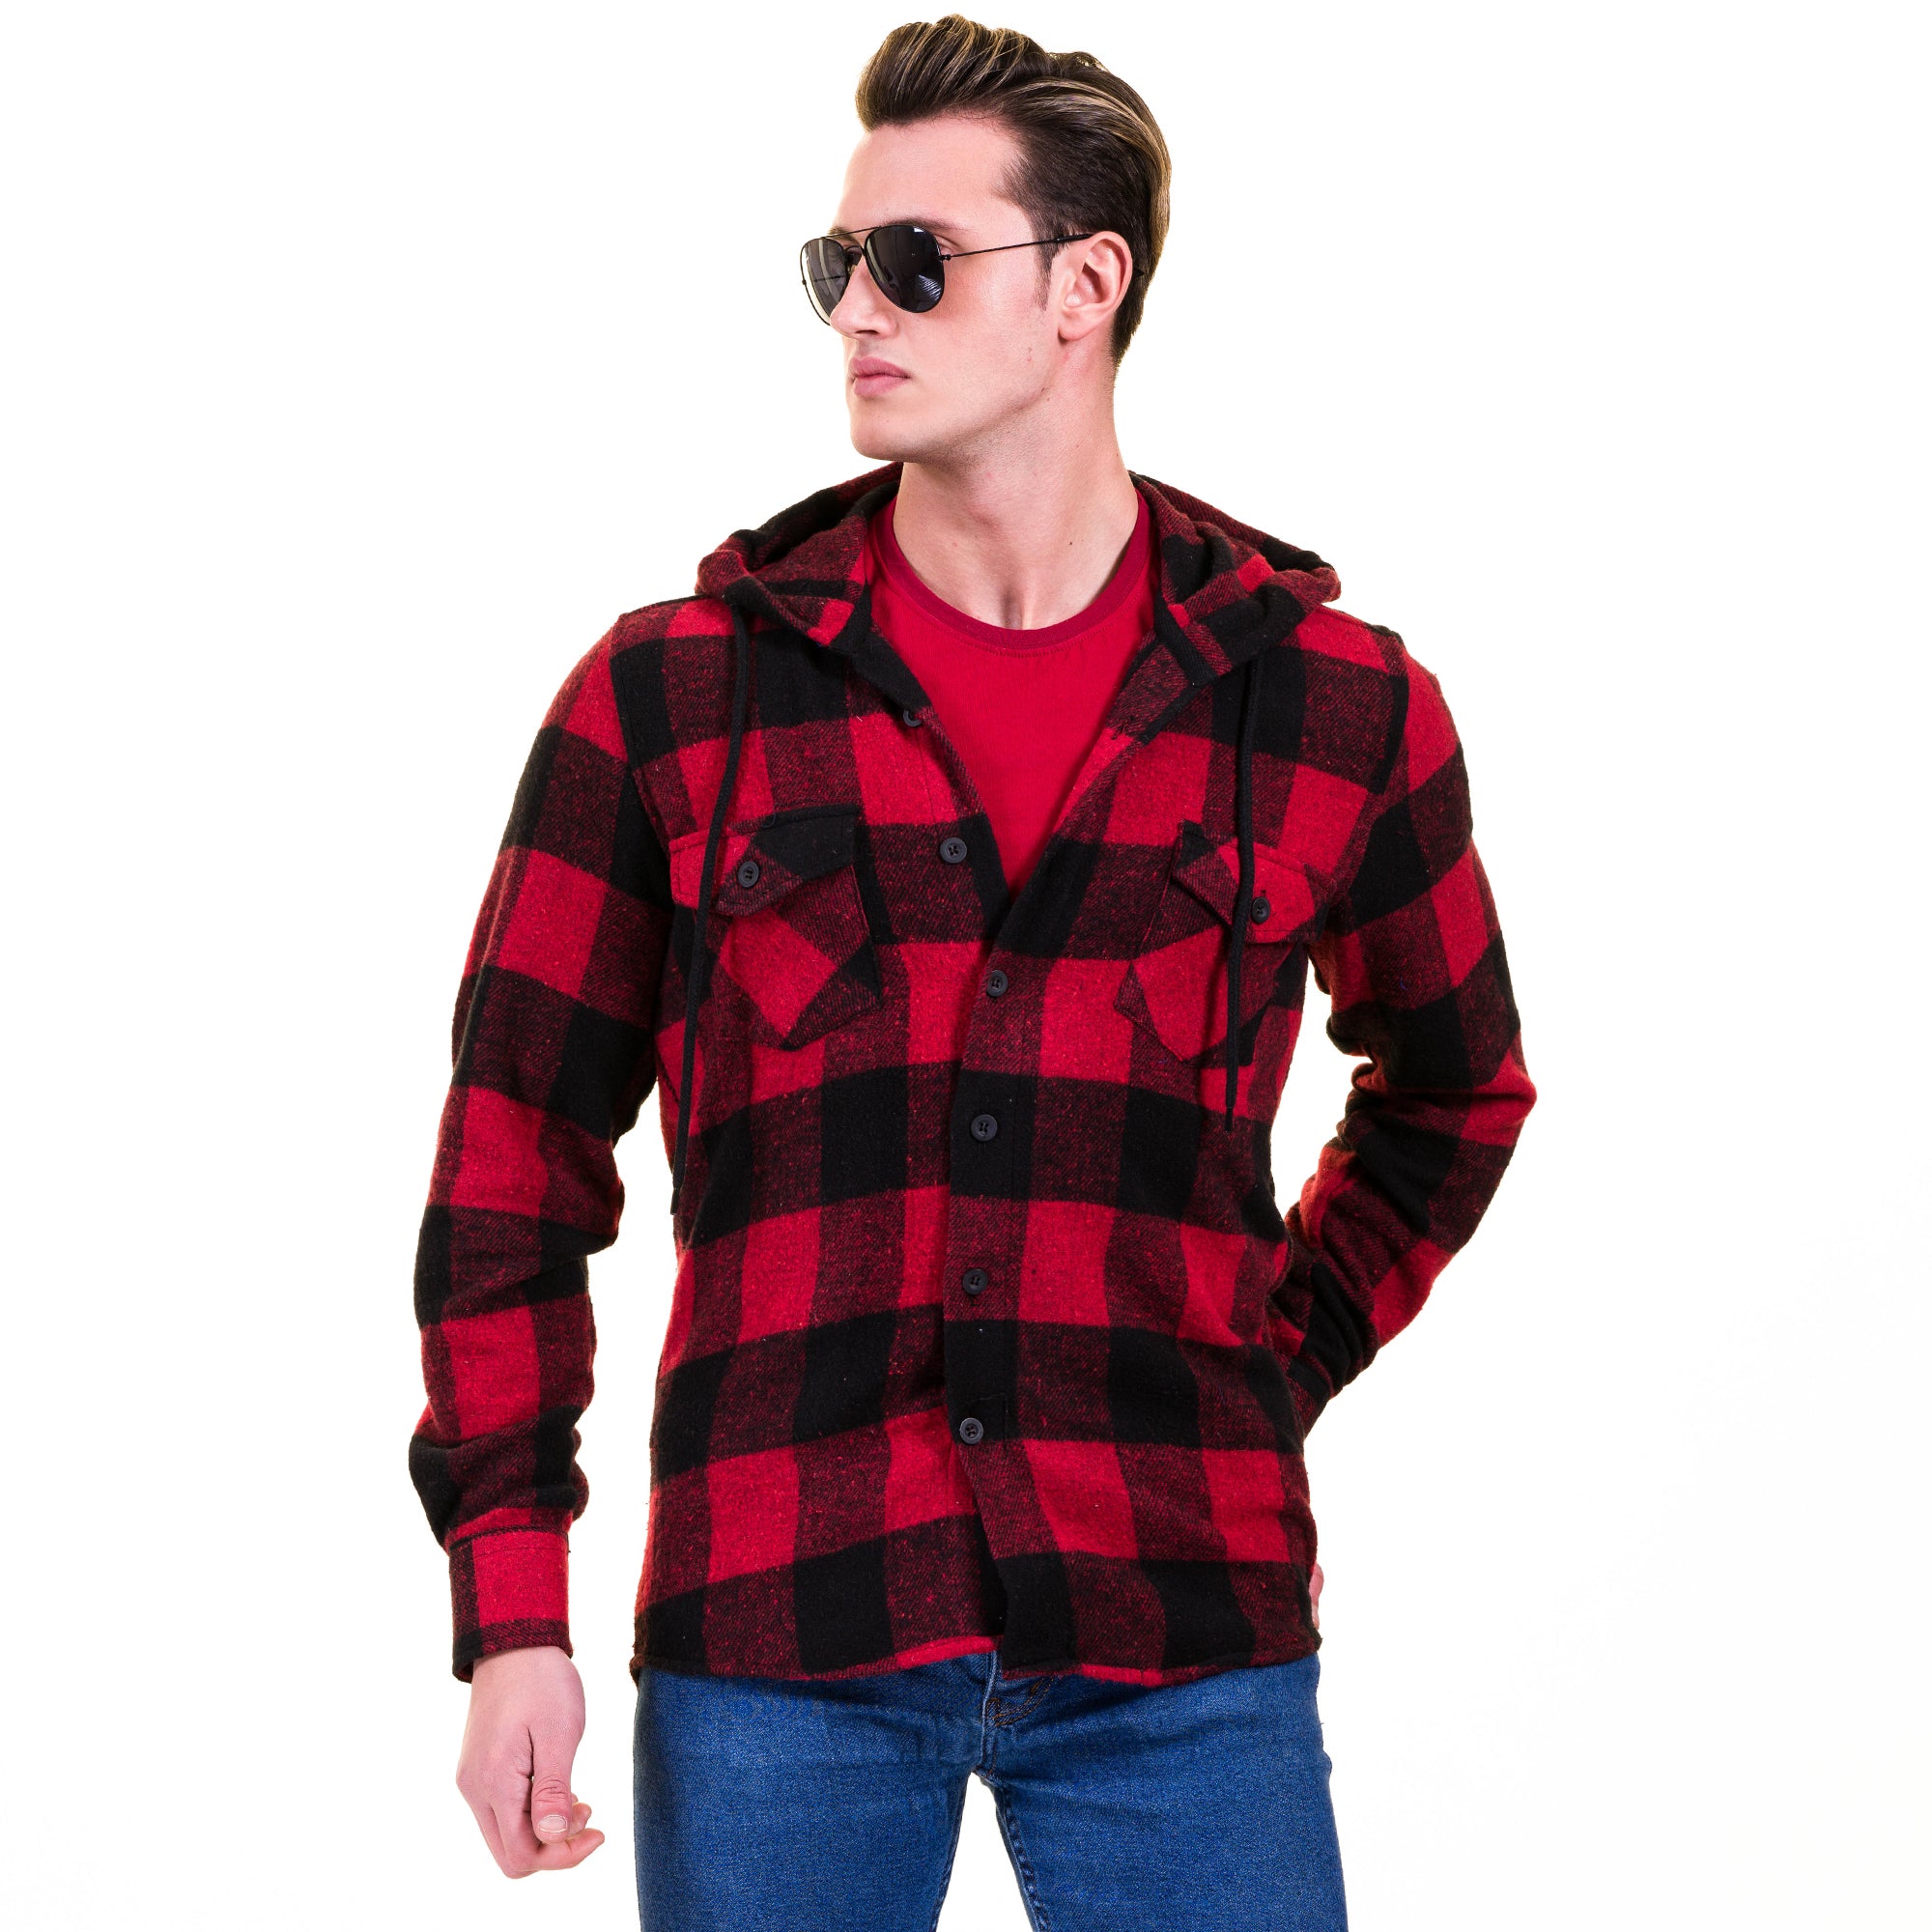 Red Black Check European Wool Luxury Zippered With Hoodie Sweater Jacket Warm Winter Tailor Fit